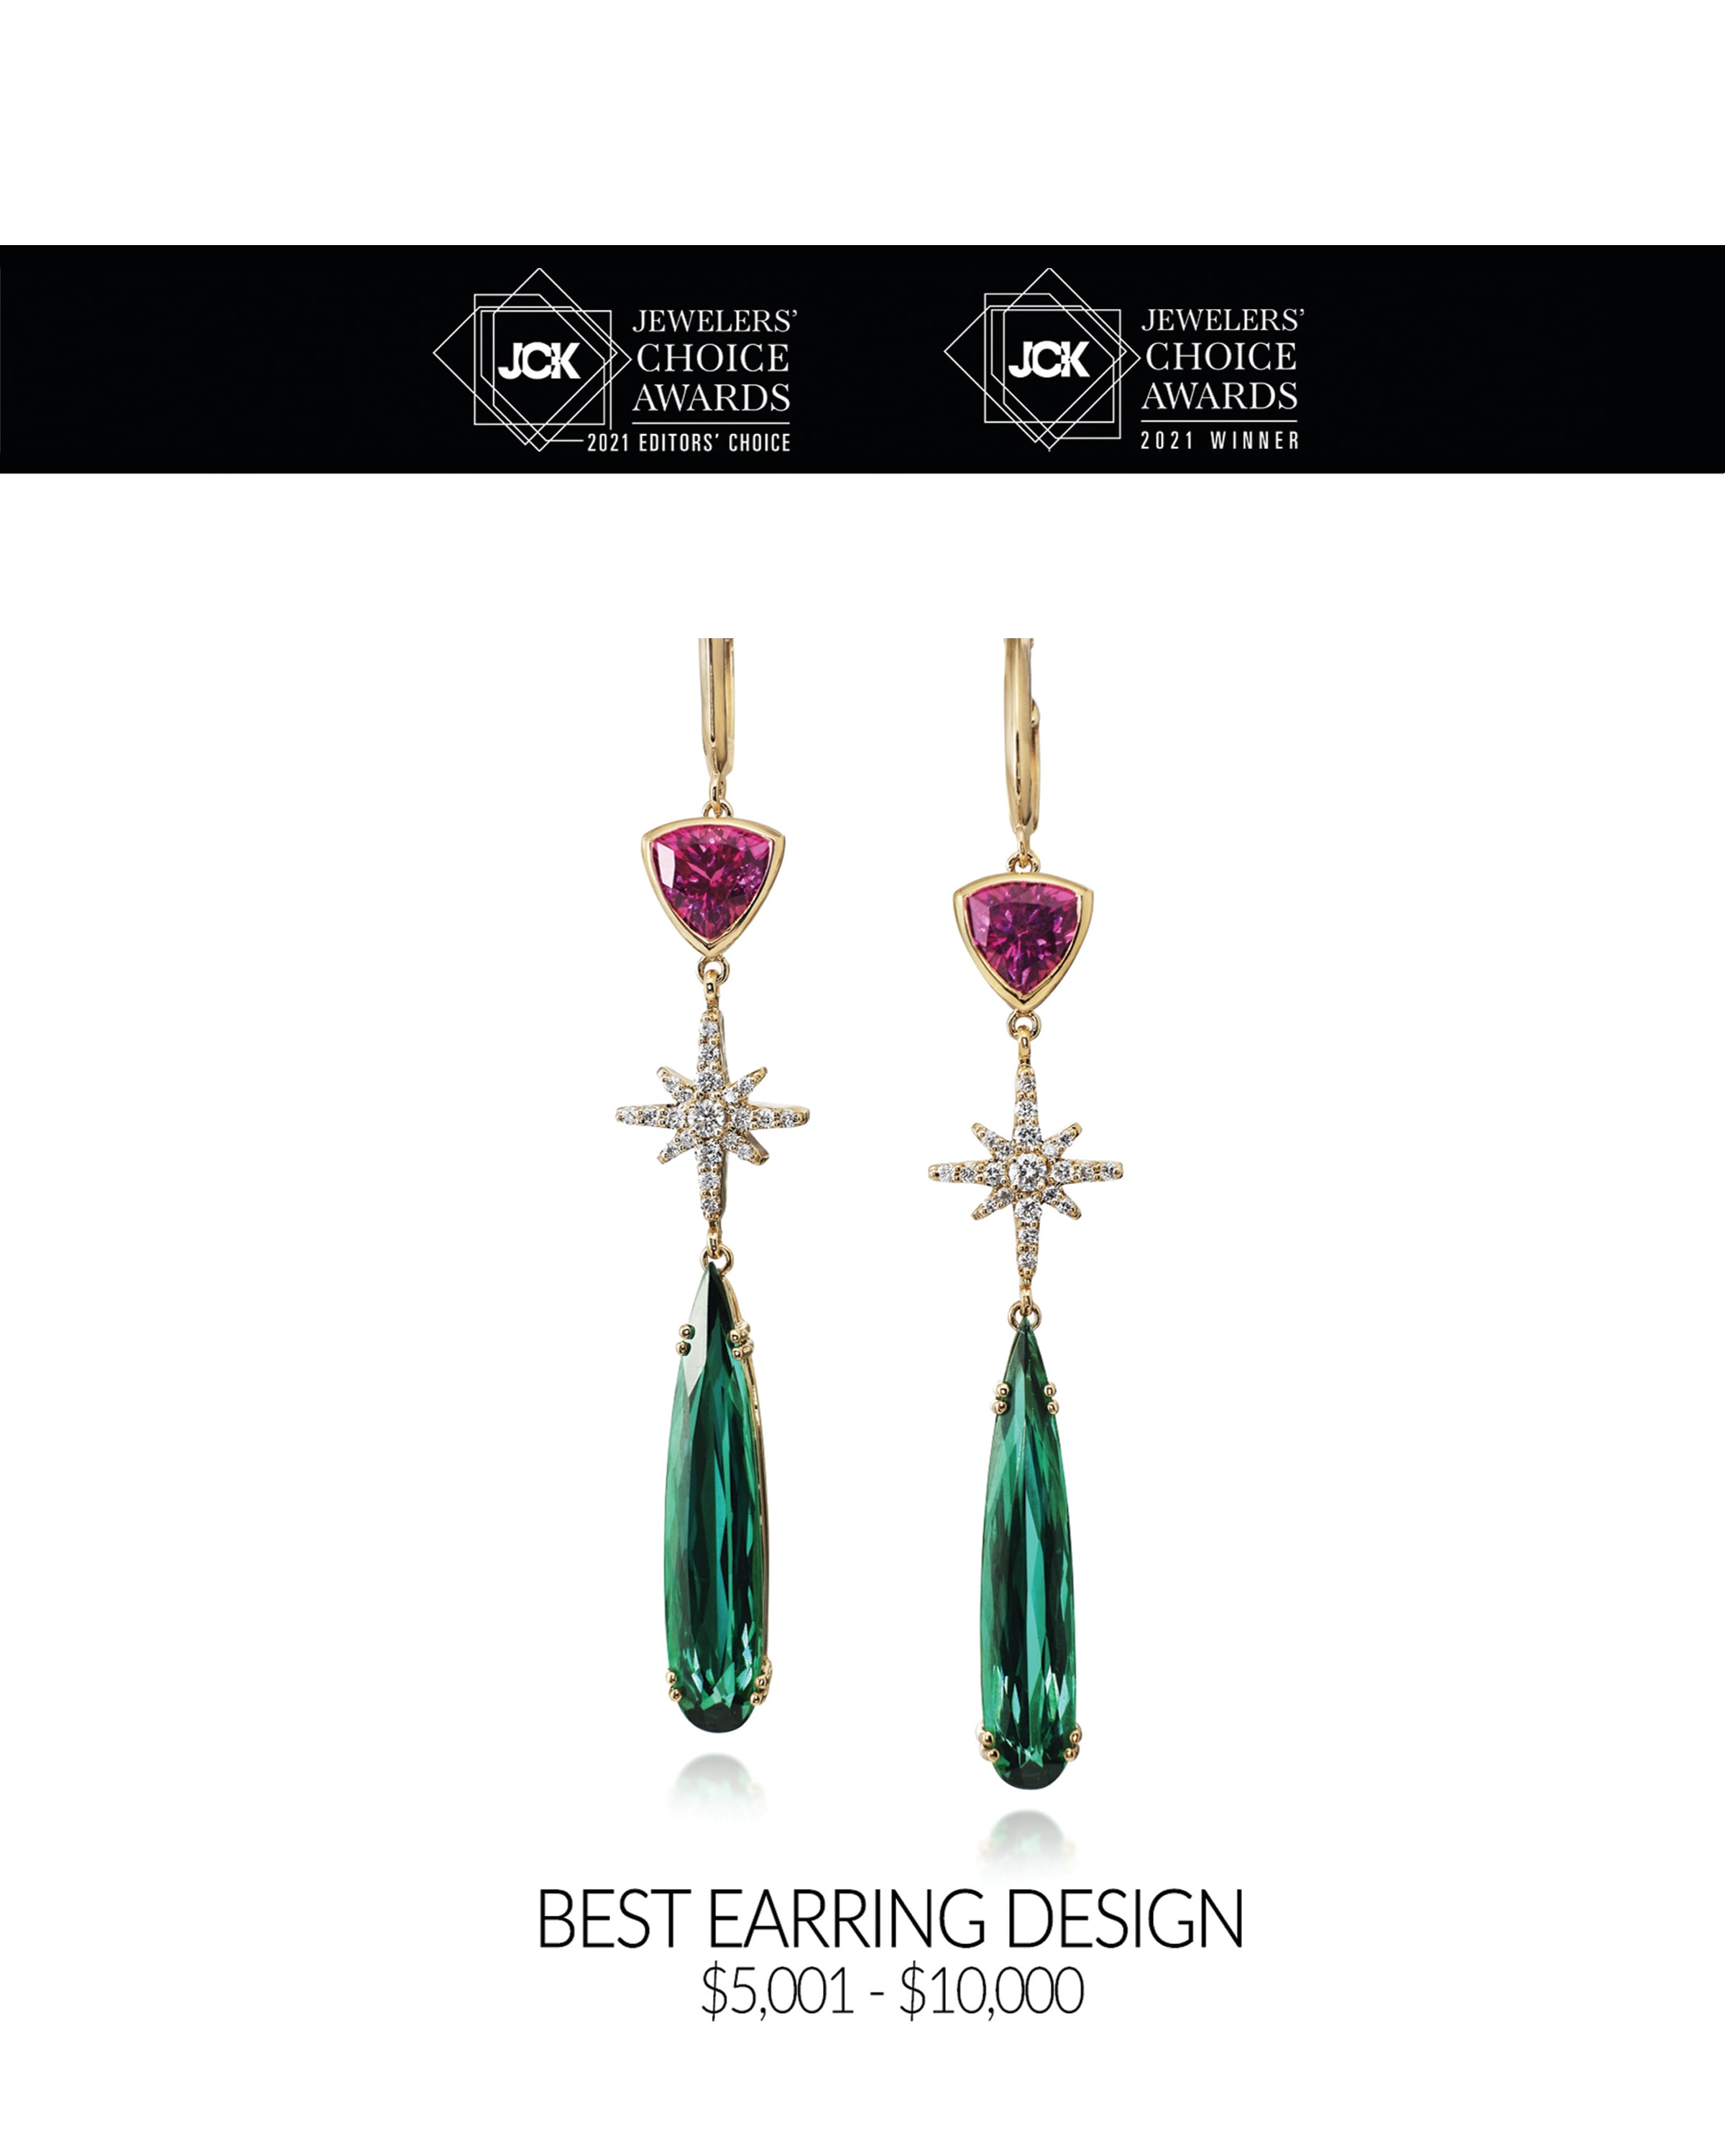 BEST EARRING DESIGN -$5,001 - $10,000 |
Striking stiletto cut 6.86 cts Lagoon Tourmalines drip from diamond-encrusted stars and dazzling Purple Garnets to create an out-of-this-world pair of earrings. Meticulously handcrafted of 100% recycled 14 kt yellow gold using responsibly sourced gemstones and made in the USA.